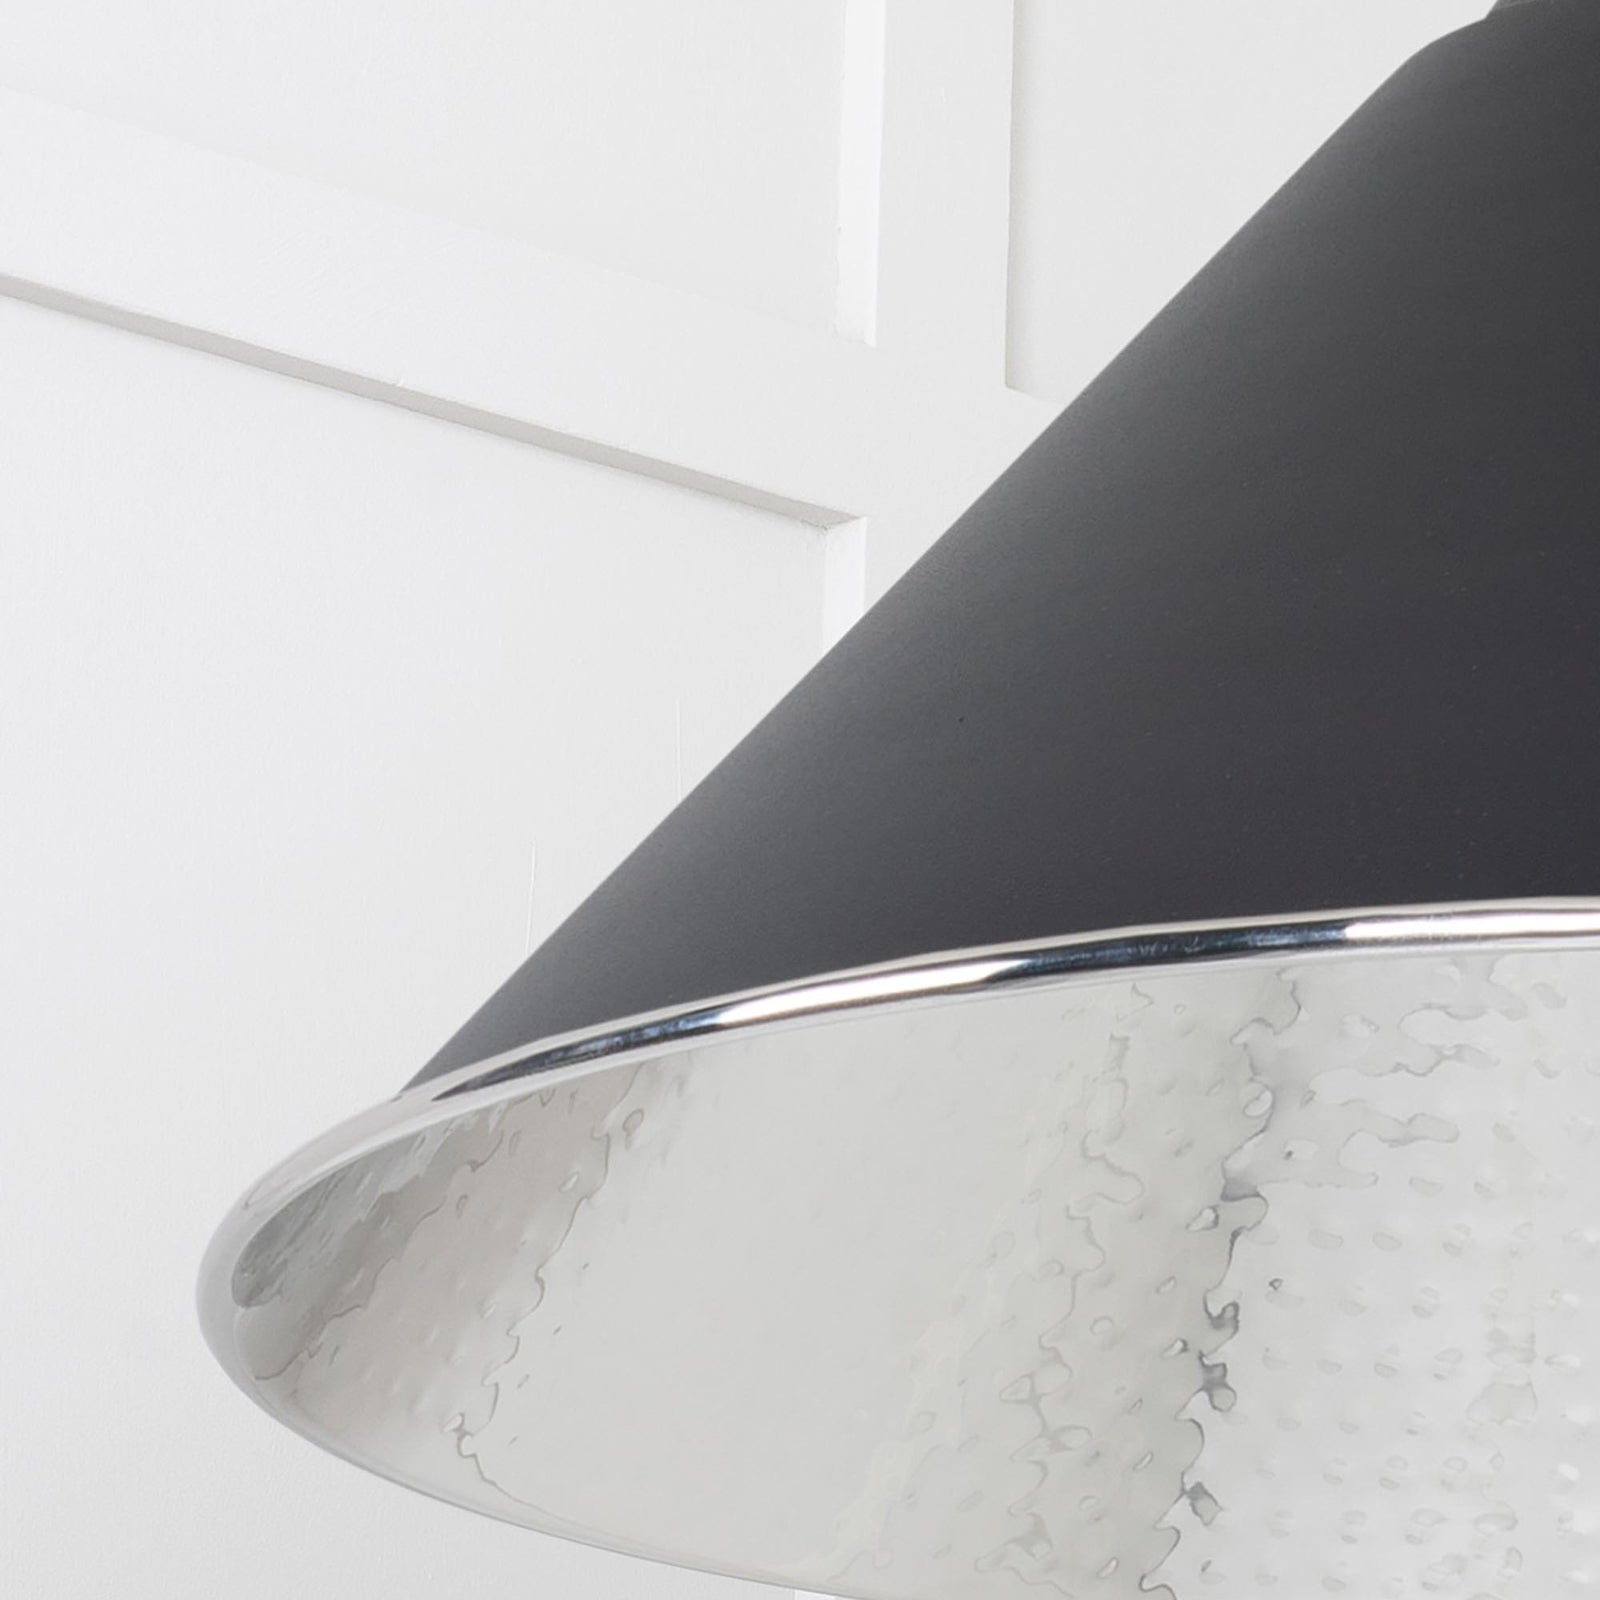 SHOW Close Up Image of Hockley Ceiling Light in Elan Black in Hammered Nickel